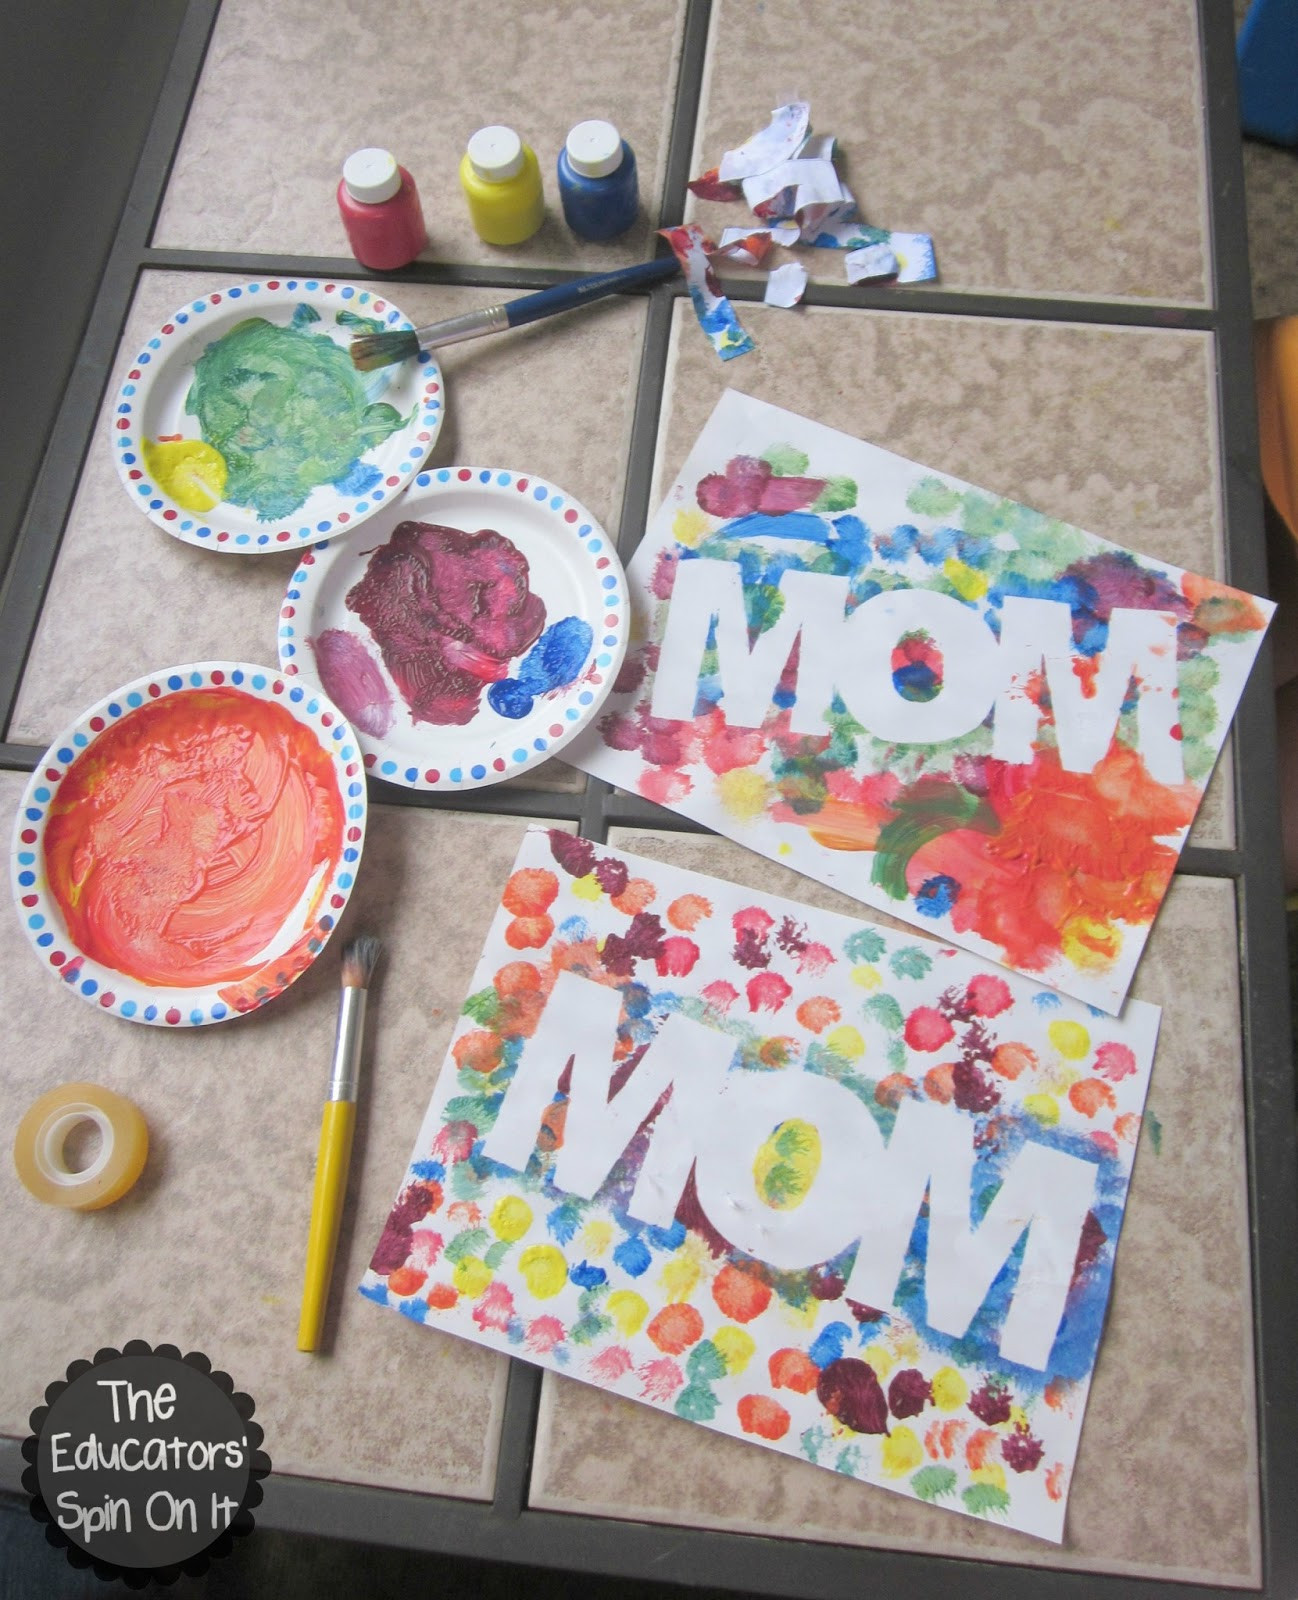 Mother Day Craft Ideas For Toddlers
 The Educators Spin It Easy Mother s Day Craft